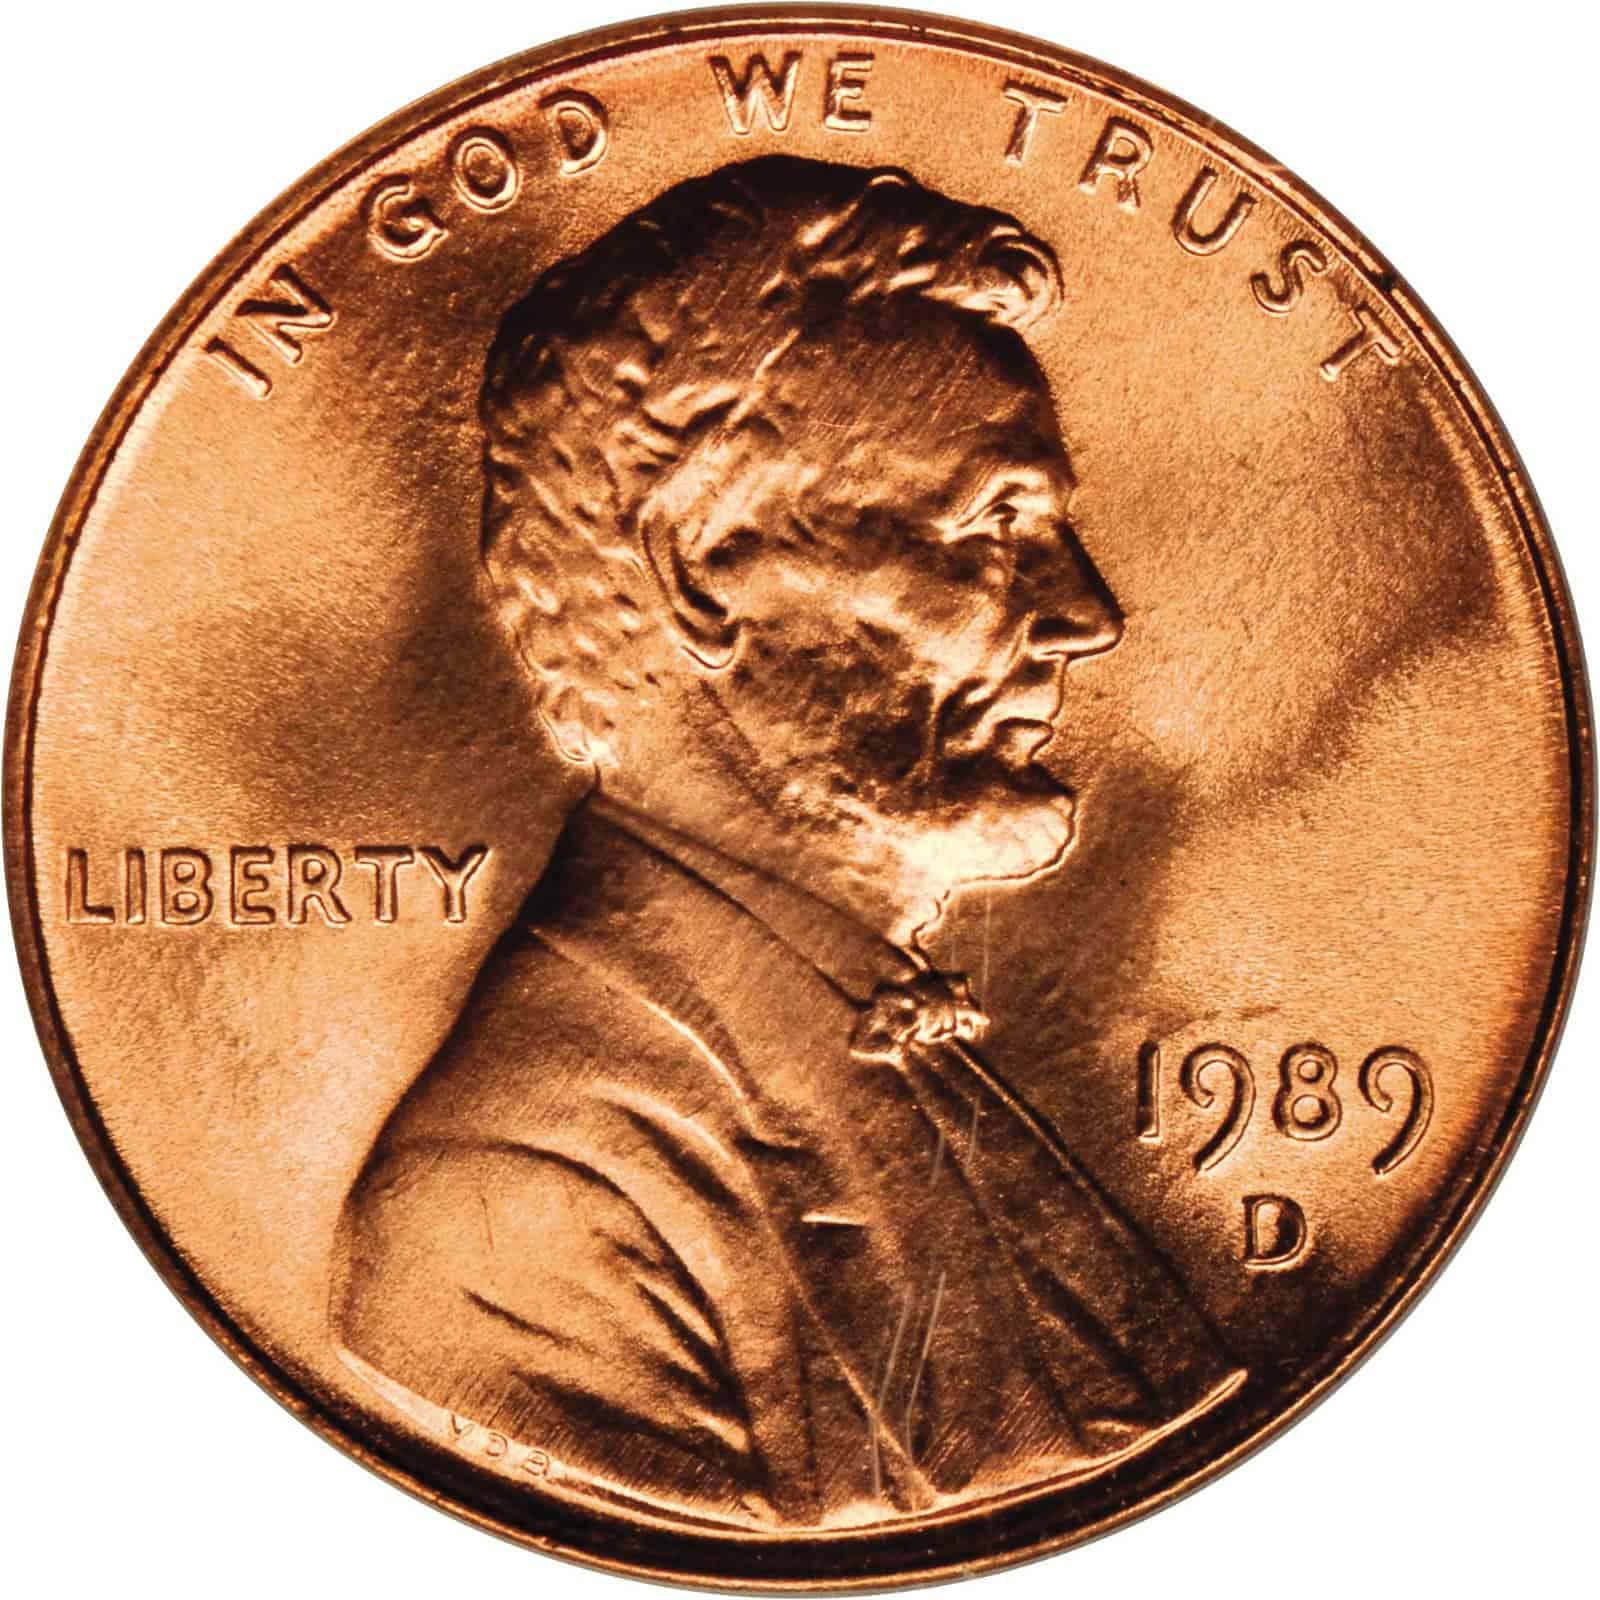 The Obverse of the 1989 Penny